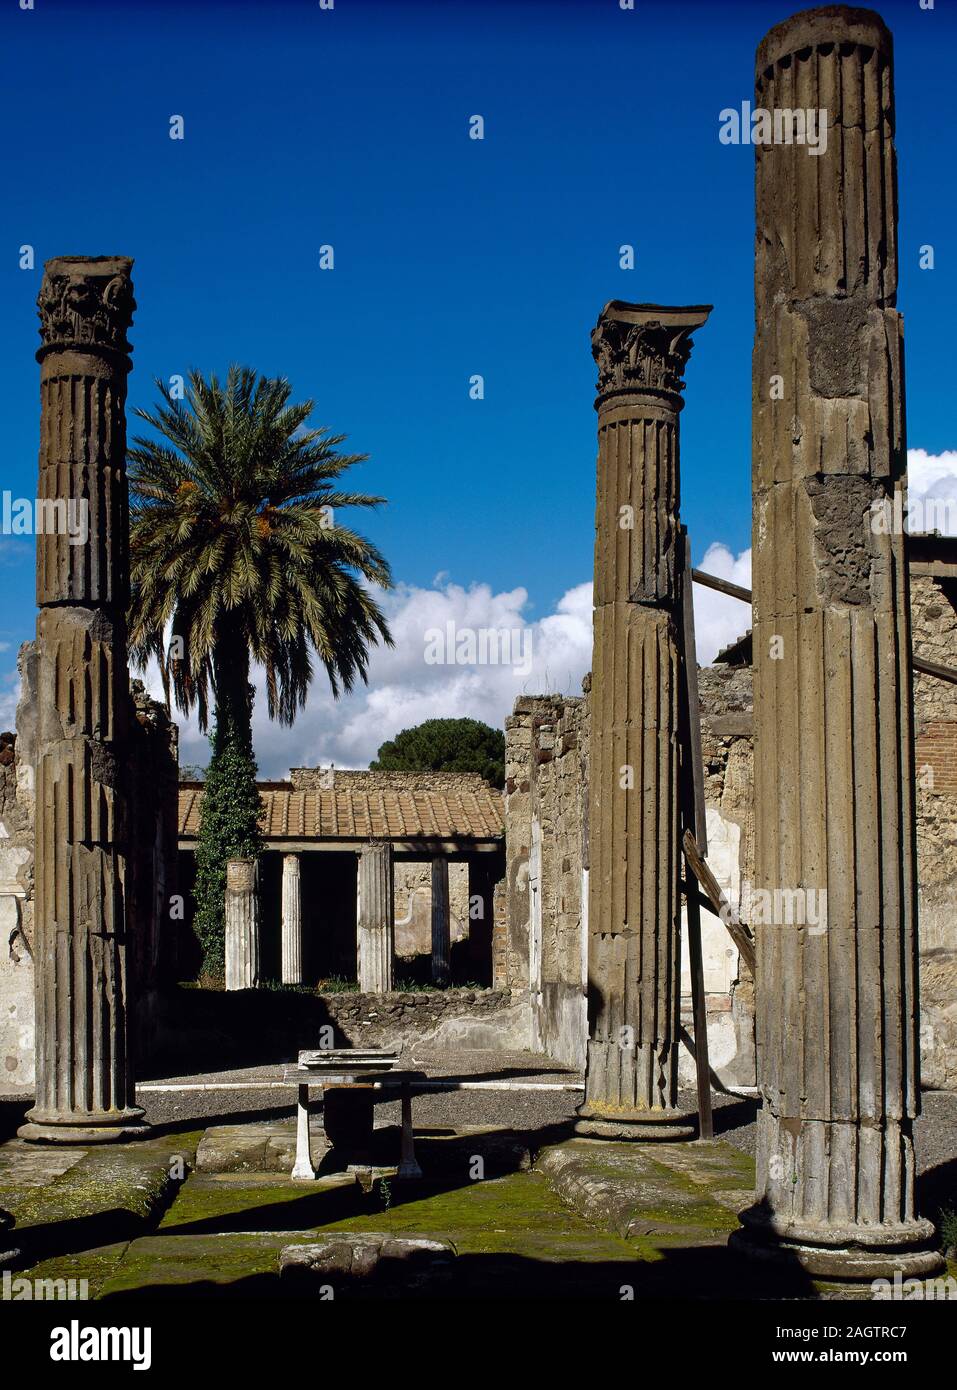 Italy, Pompeii. Roman city destroyed in 79 AD by the eruption of the Vesuvius volcano. House of the Labyrinth. Dated back to the Samnite period. View of the atrium. Four columns around the pool for collecting rainwater. Insula 11. Campania. Stock Photo